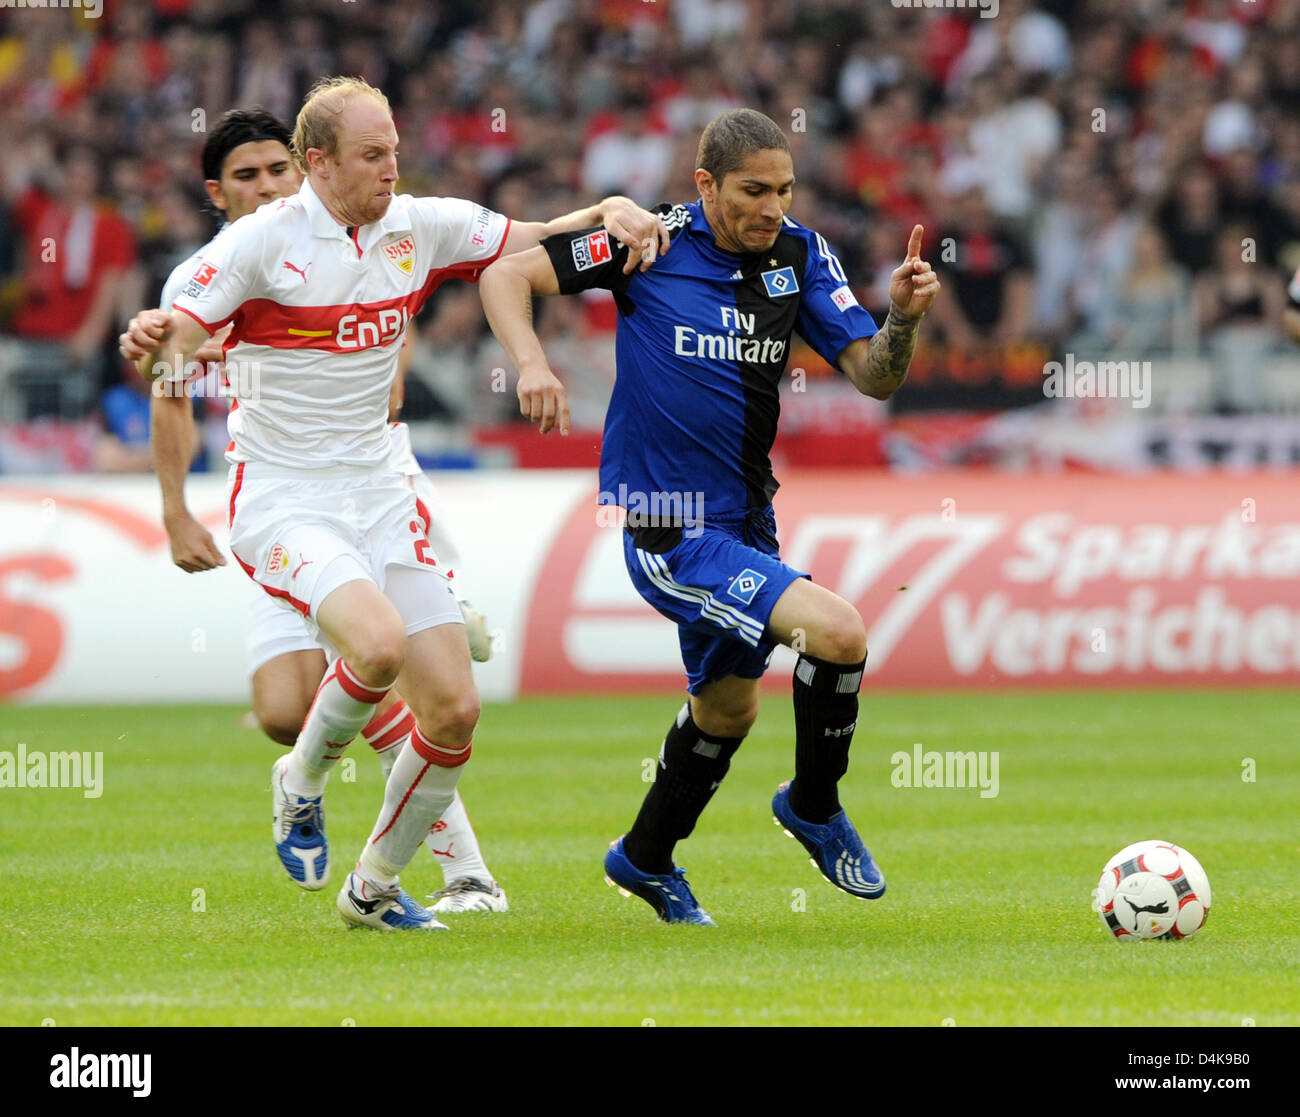 Stuttgart?s Ludovic Magnin (L) fights for the ball with Hamburg?s Jose Paolo Guerrero during the Bundesliga match VfB Stuttgart vs SV Hamburg at Mercedes-Benz Arena stadium in Stuttgart, Germany, 12 April 2009. Photo: ULI DECK (ATTENTION: EMBARGO CONDITIONS! The DFL permits the further utilisation of the pictures in IPTV, mobile services and other new technologies no earlier than t Stock Photo